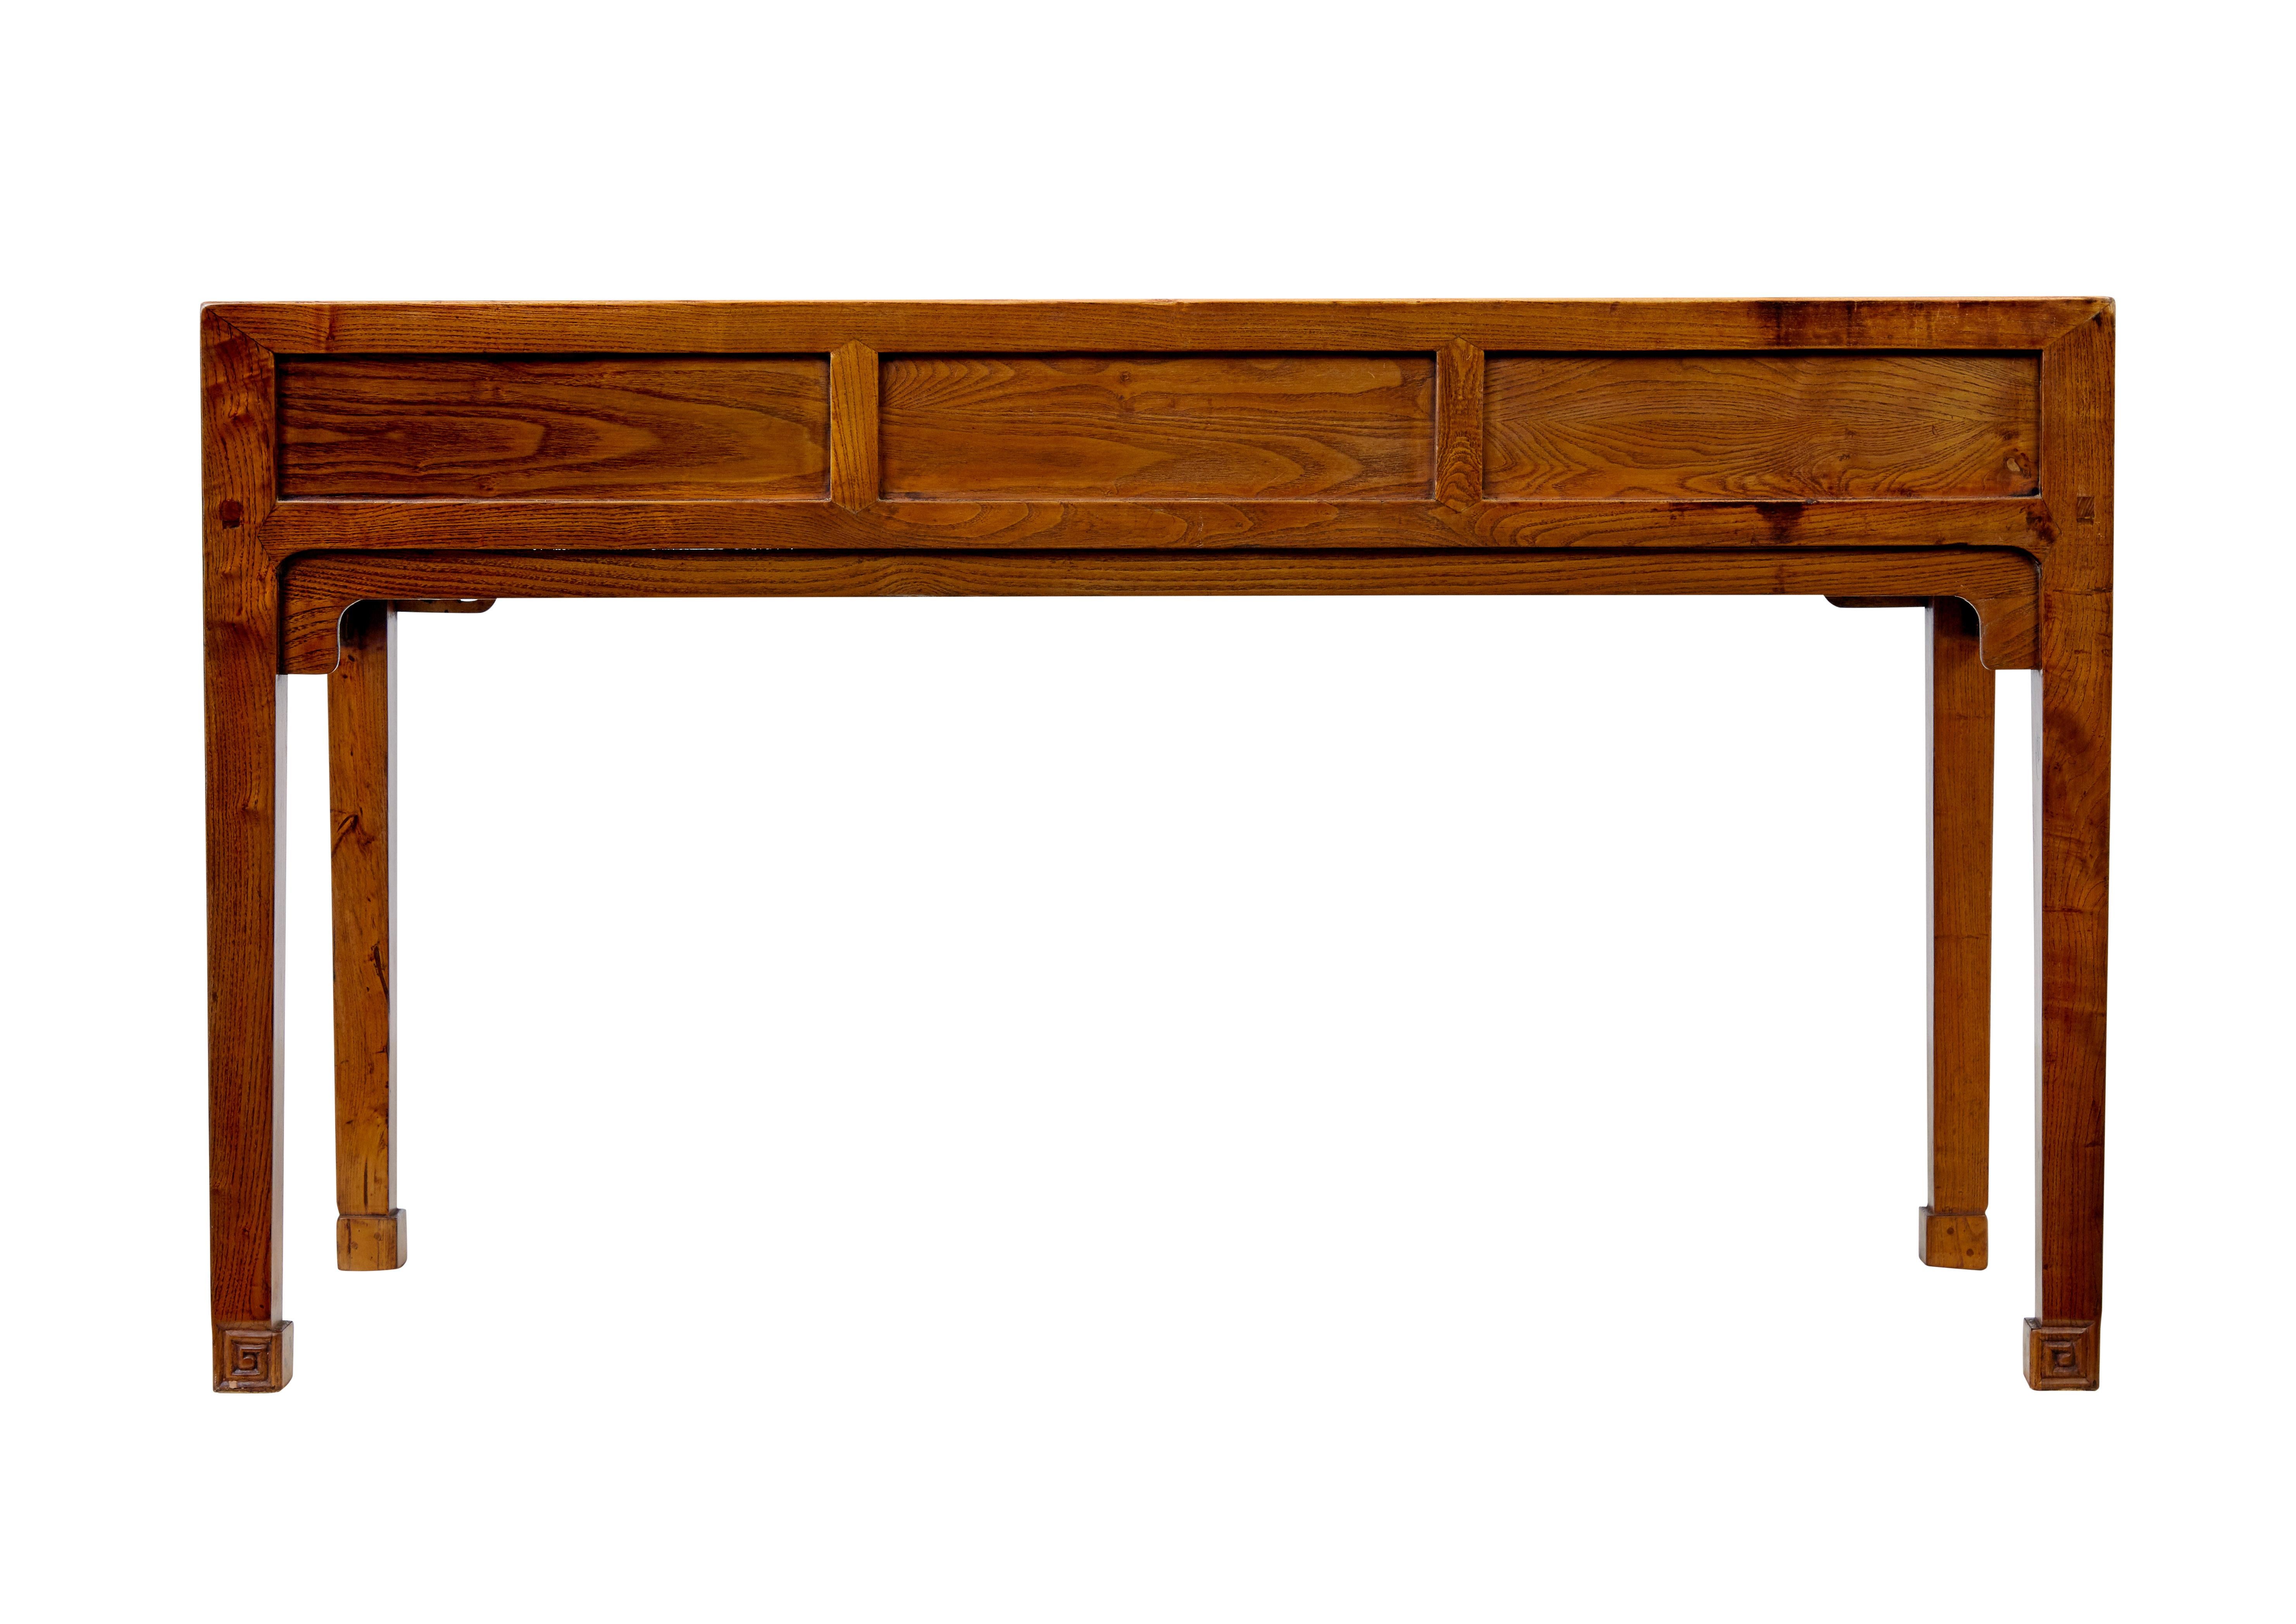 19th century elm Chinese console table sideboard In Good Condition For Sale In Debenham, Suffolk